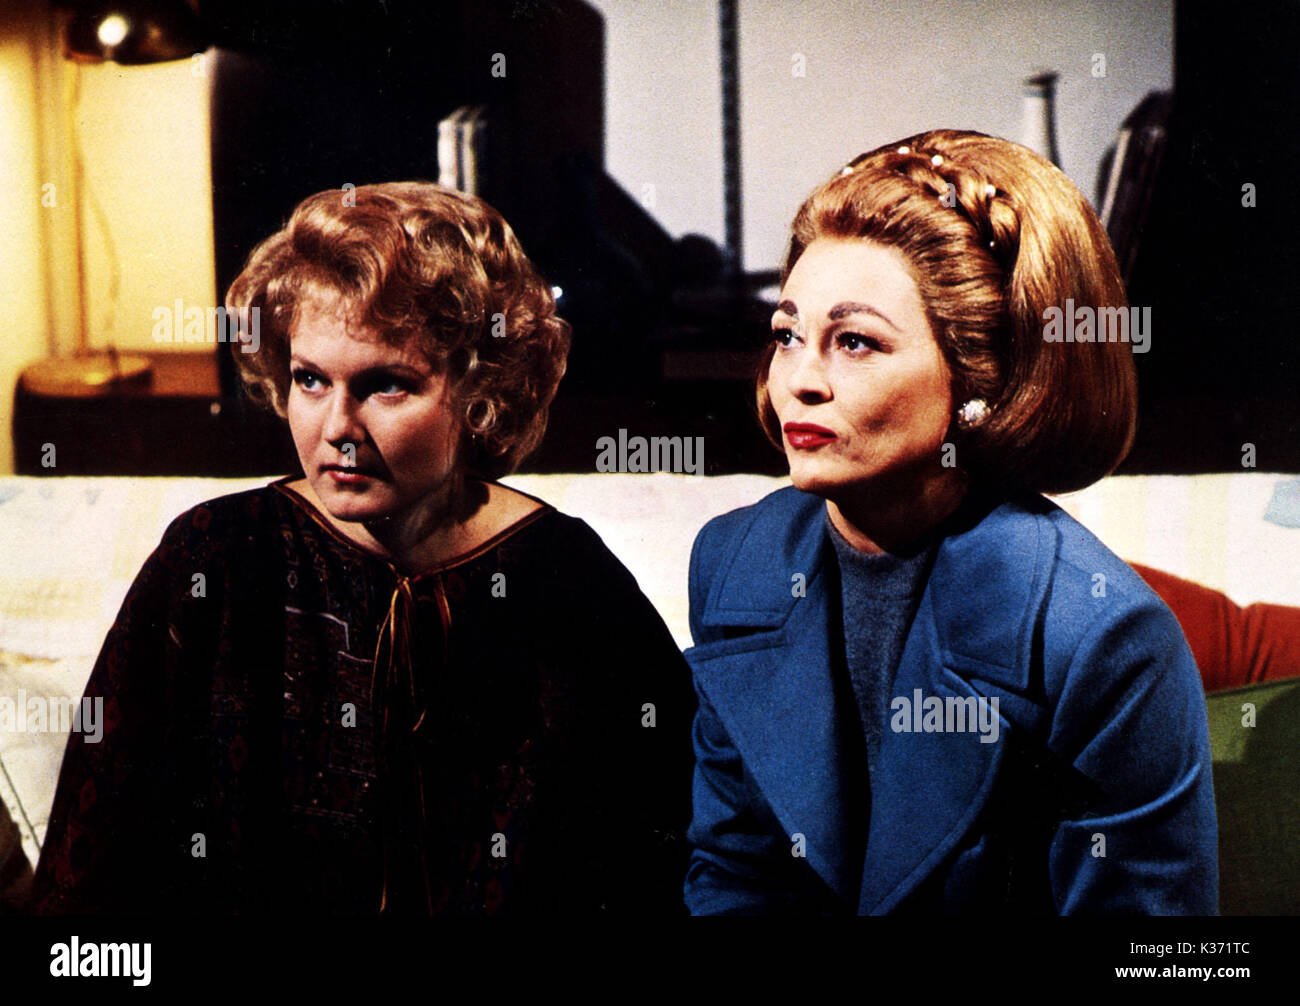 MOMMIE DEAREST Directed by Frank Perry with Diana Scarwid as the adult Christina Crawford and Faye Dunaway as her adoptive mother, film star Joan Crawford FILM RELEASE BY PARAMOUNT PICTURES     Date: 1981 Stock Photo